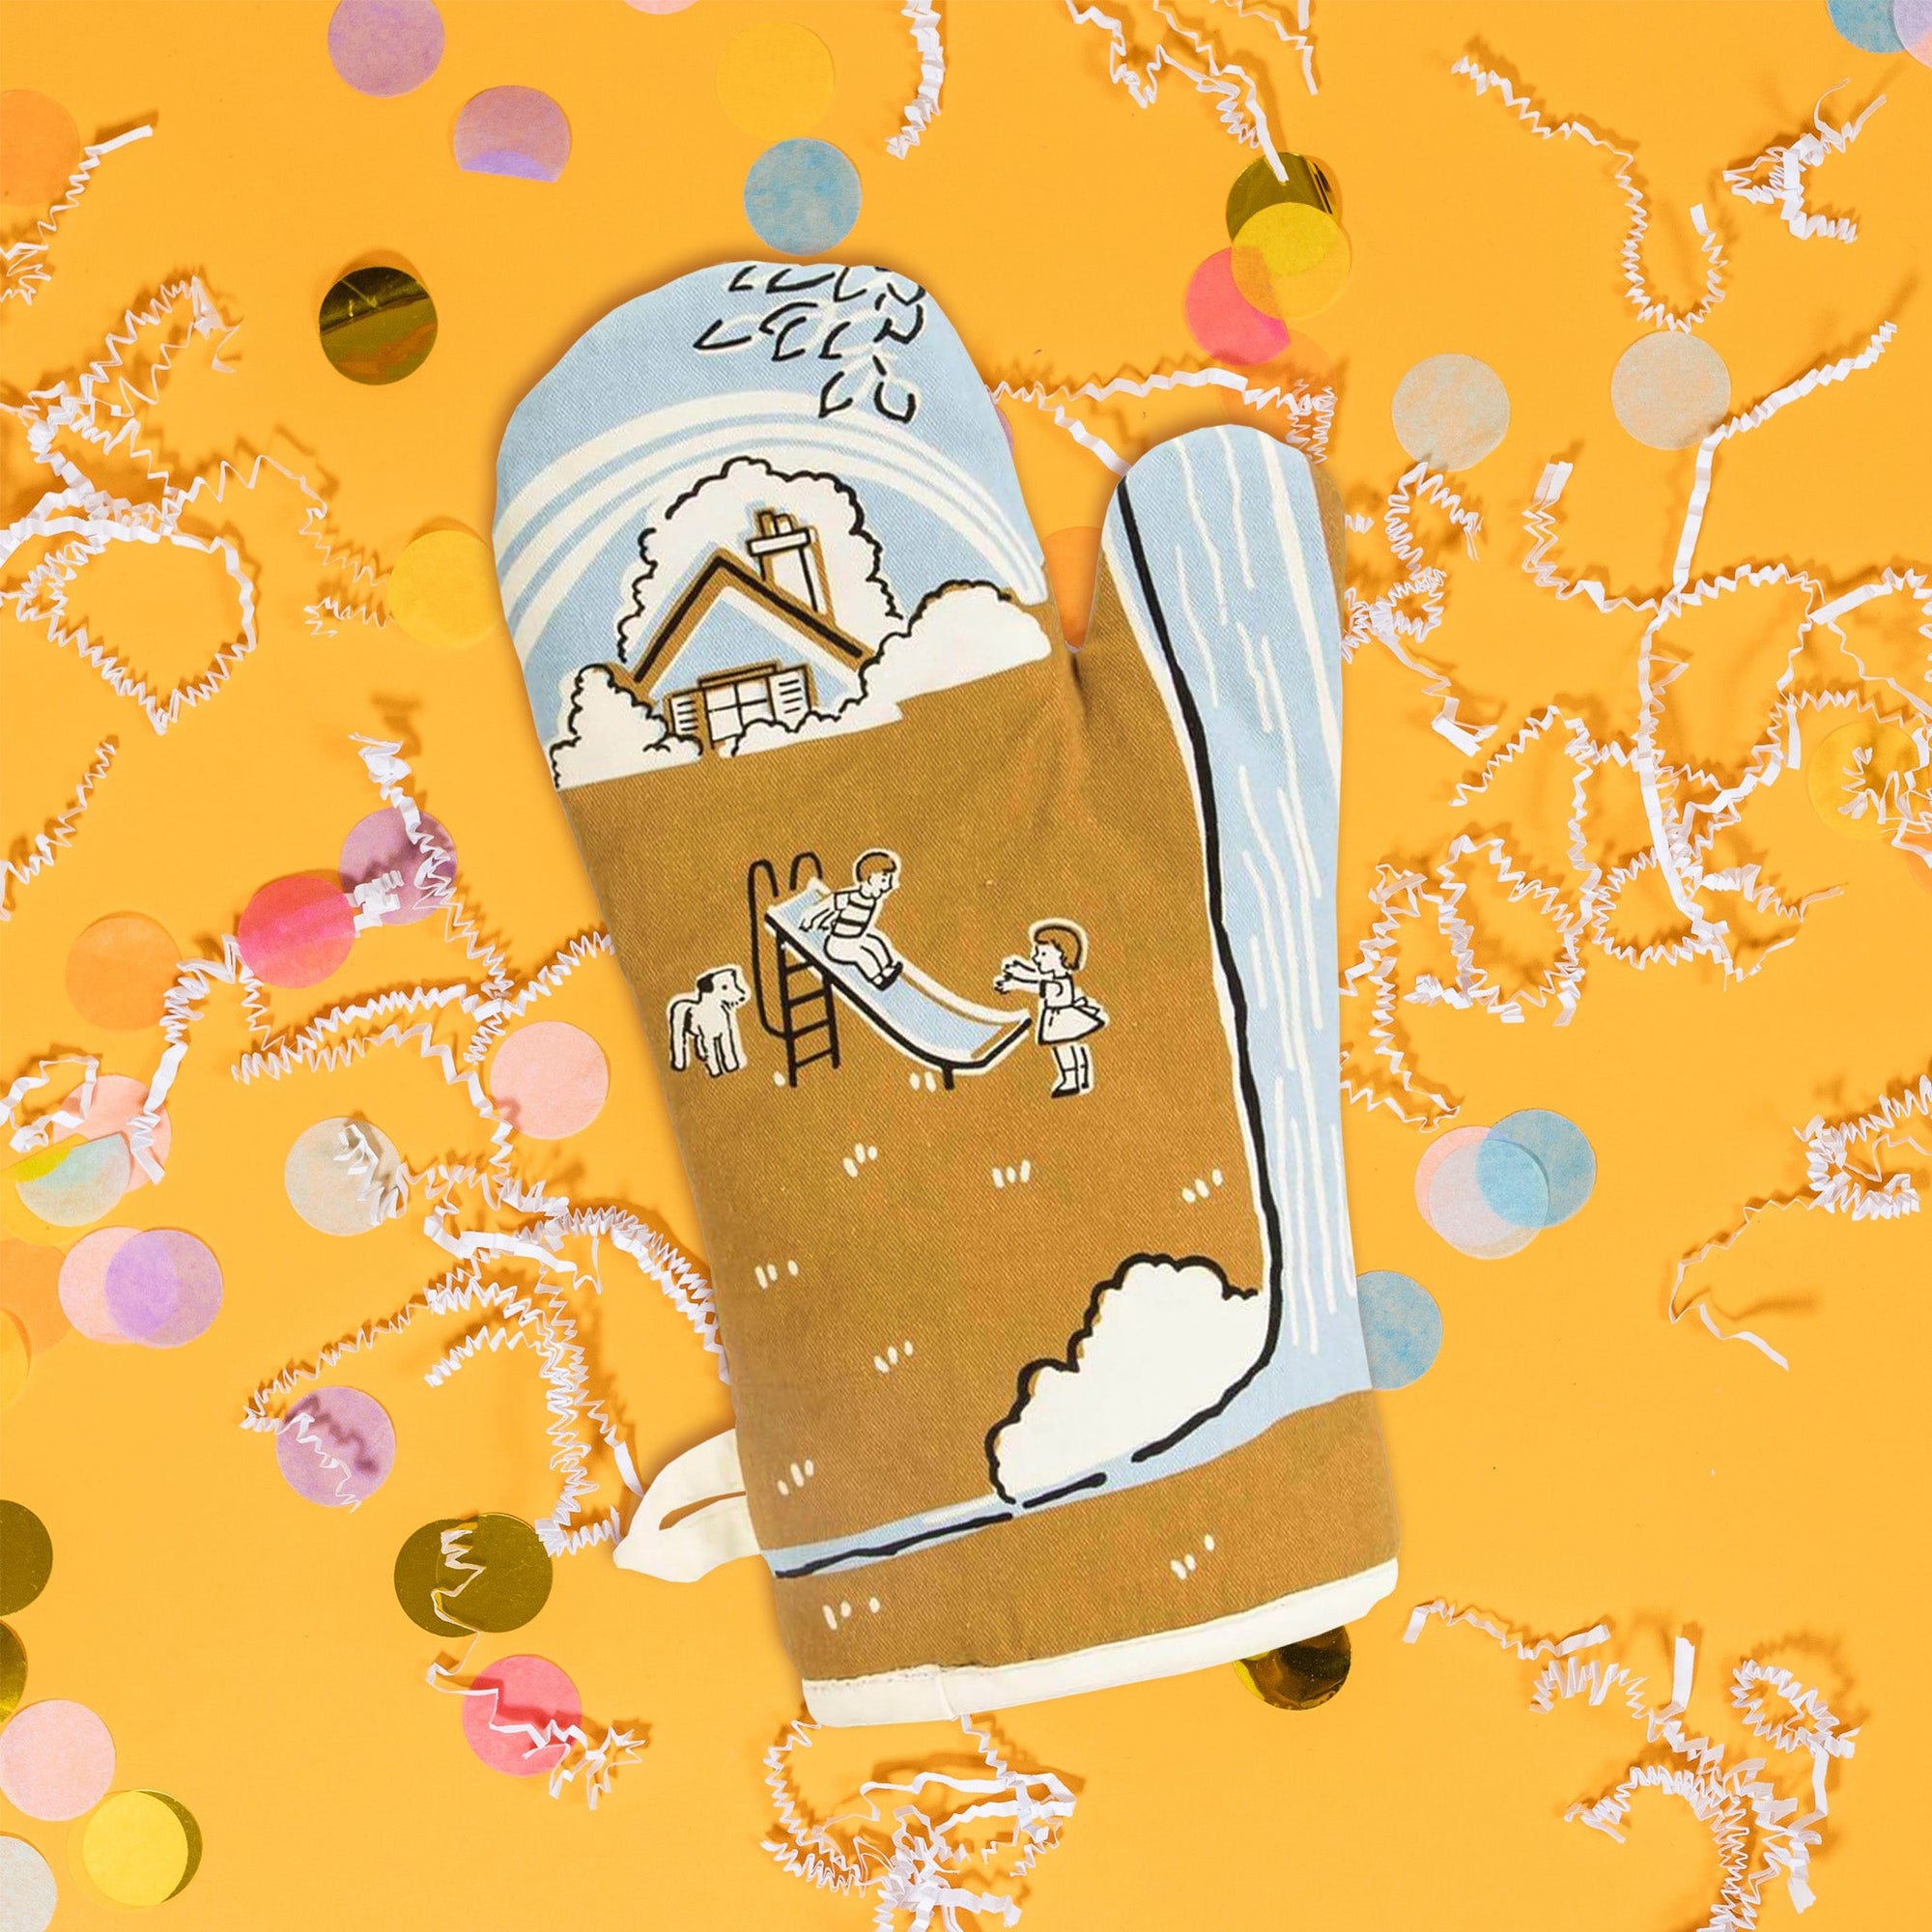 On a sunny mustard background sits an oven mitt with white crinkle and big, colorful confetti scattered around. The back of this light blue oven mitt has a vintage illustration of a house with trees, a dog and two children playing on a slide. The colors are light blue, gold, black, and white. At the top it says "I love my asshole kids." in black serif font.